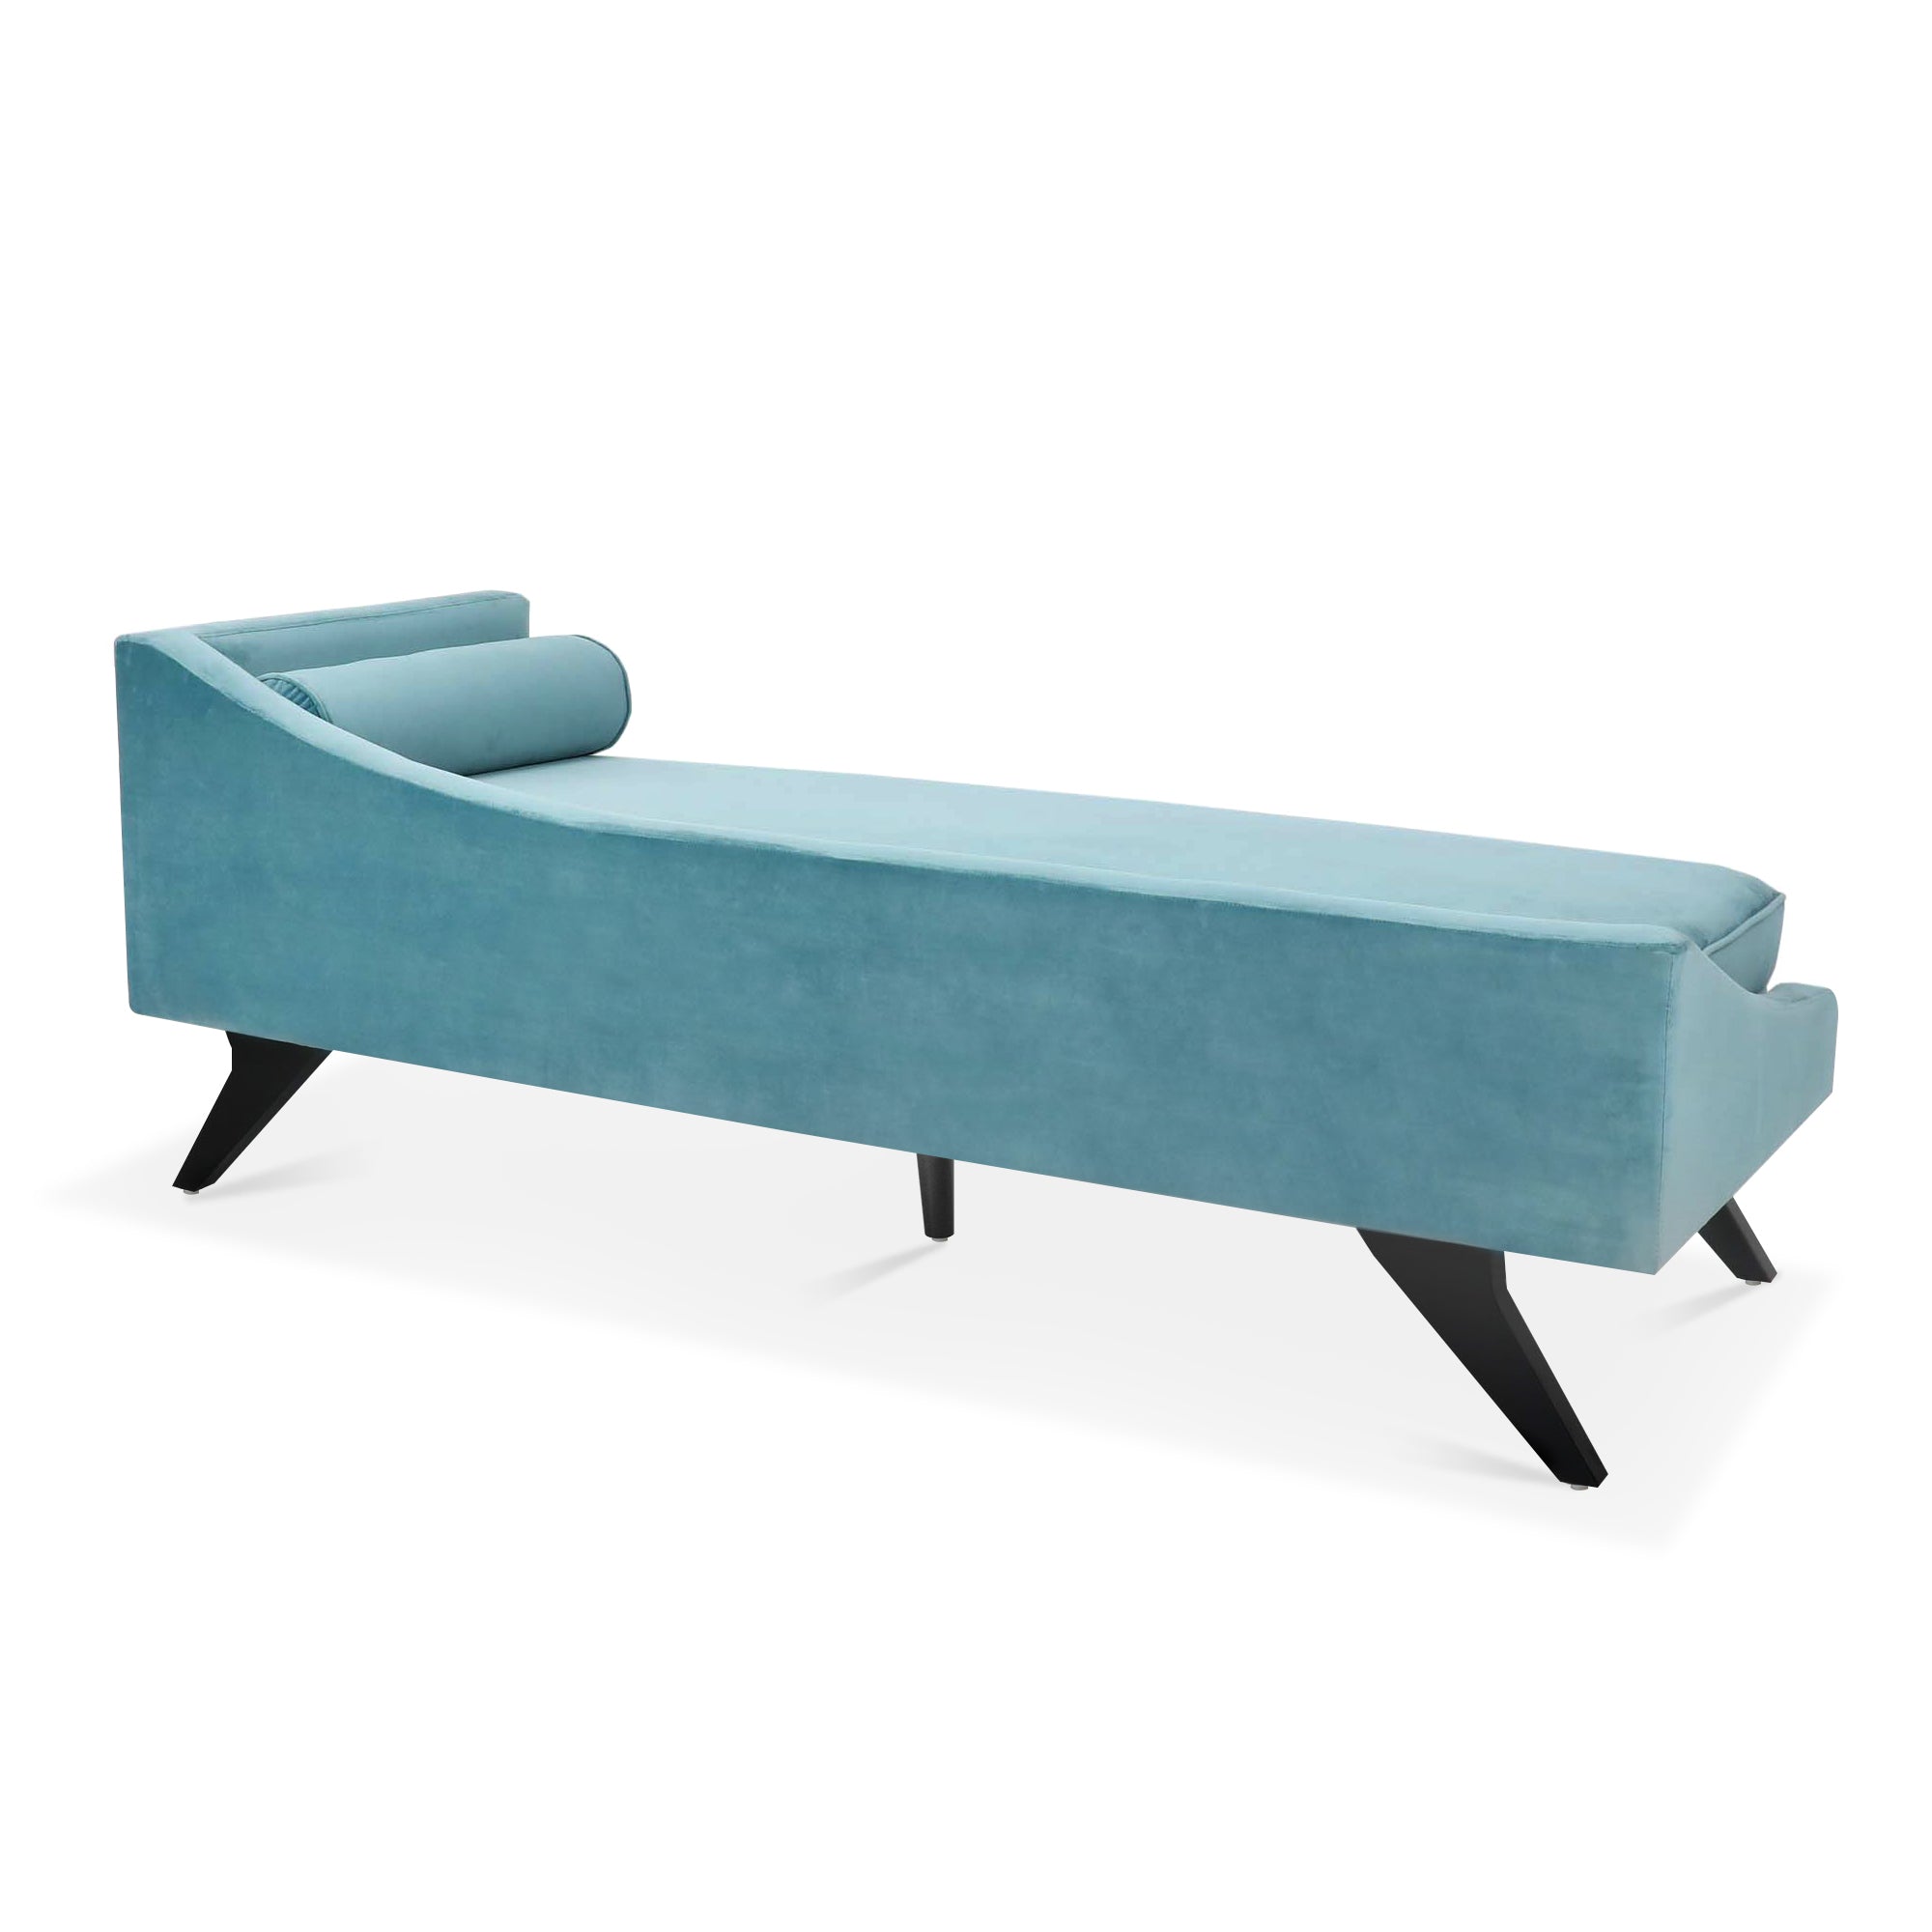 ZNTS Right Square Arm Reclining Chaise Lounge W68034309